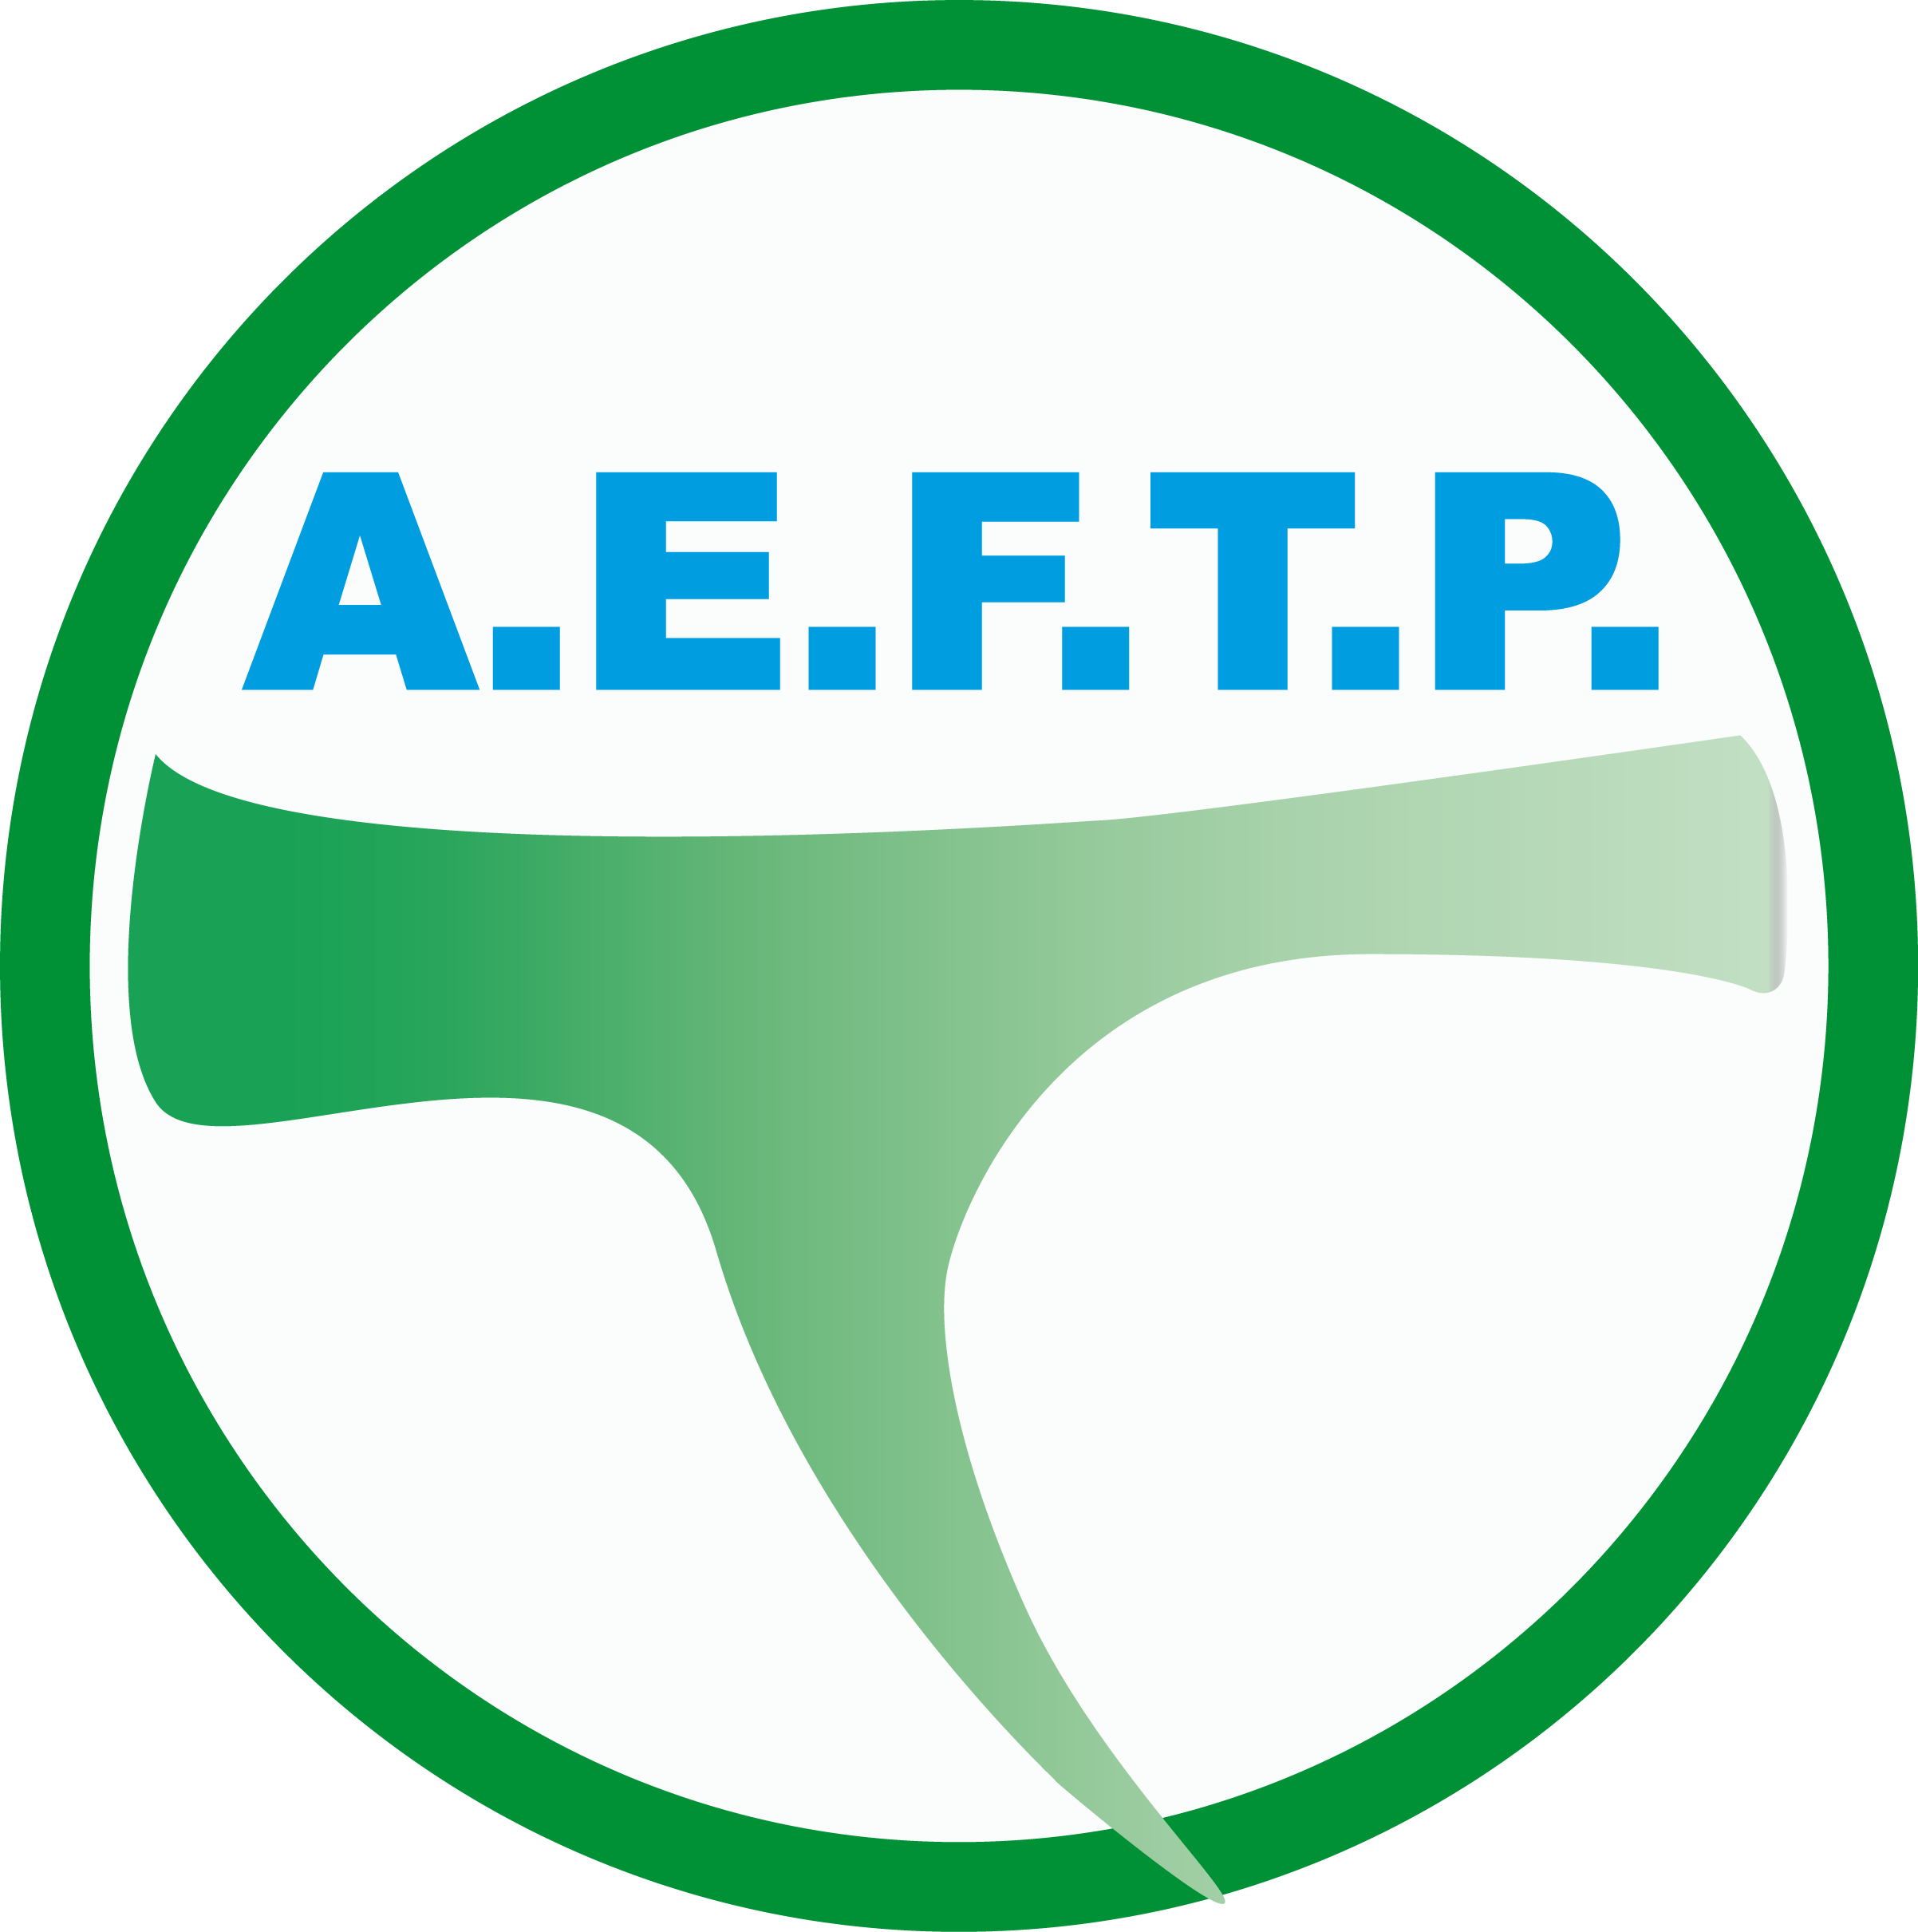 AEFTP